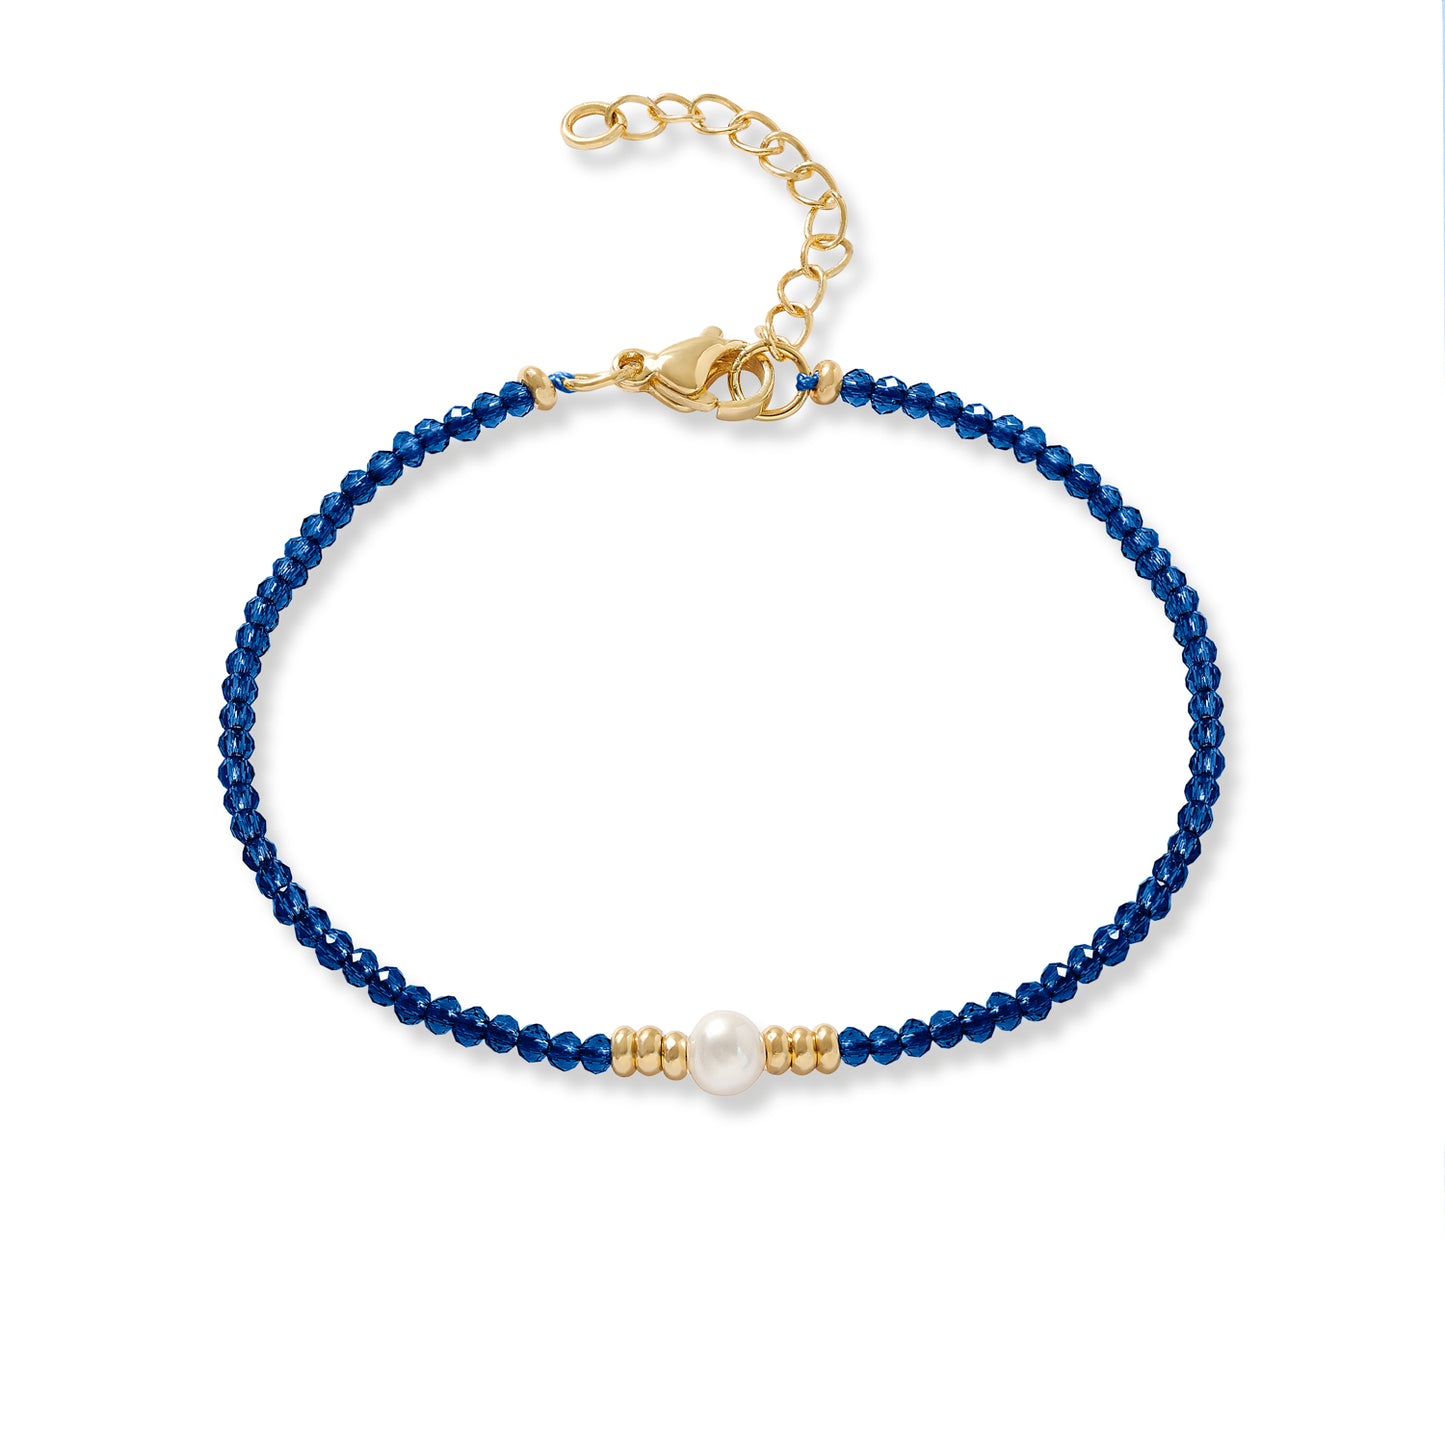 Clara fine blue spinel bracelet with central cultured freshwater pearl